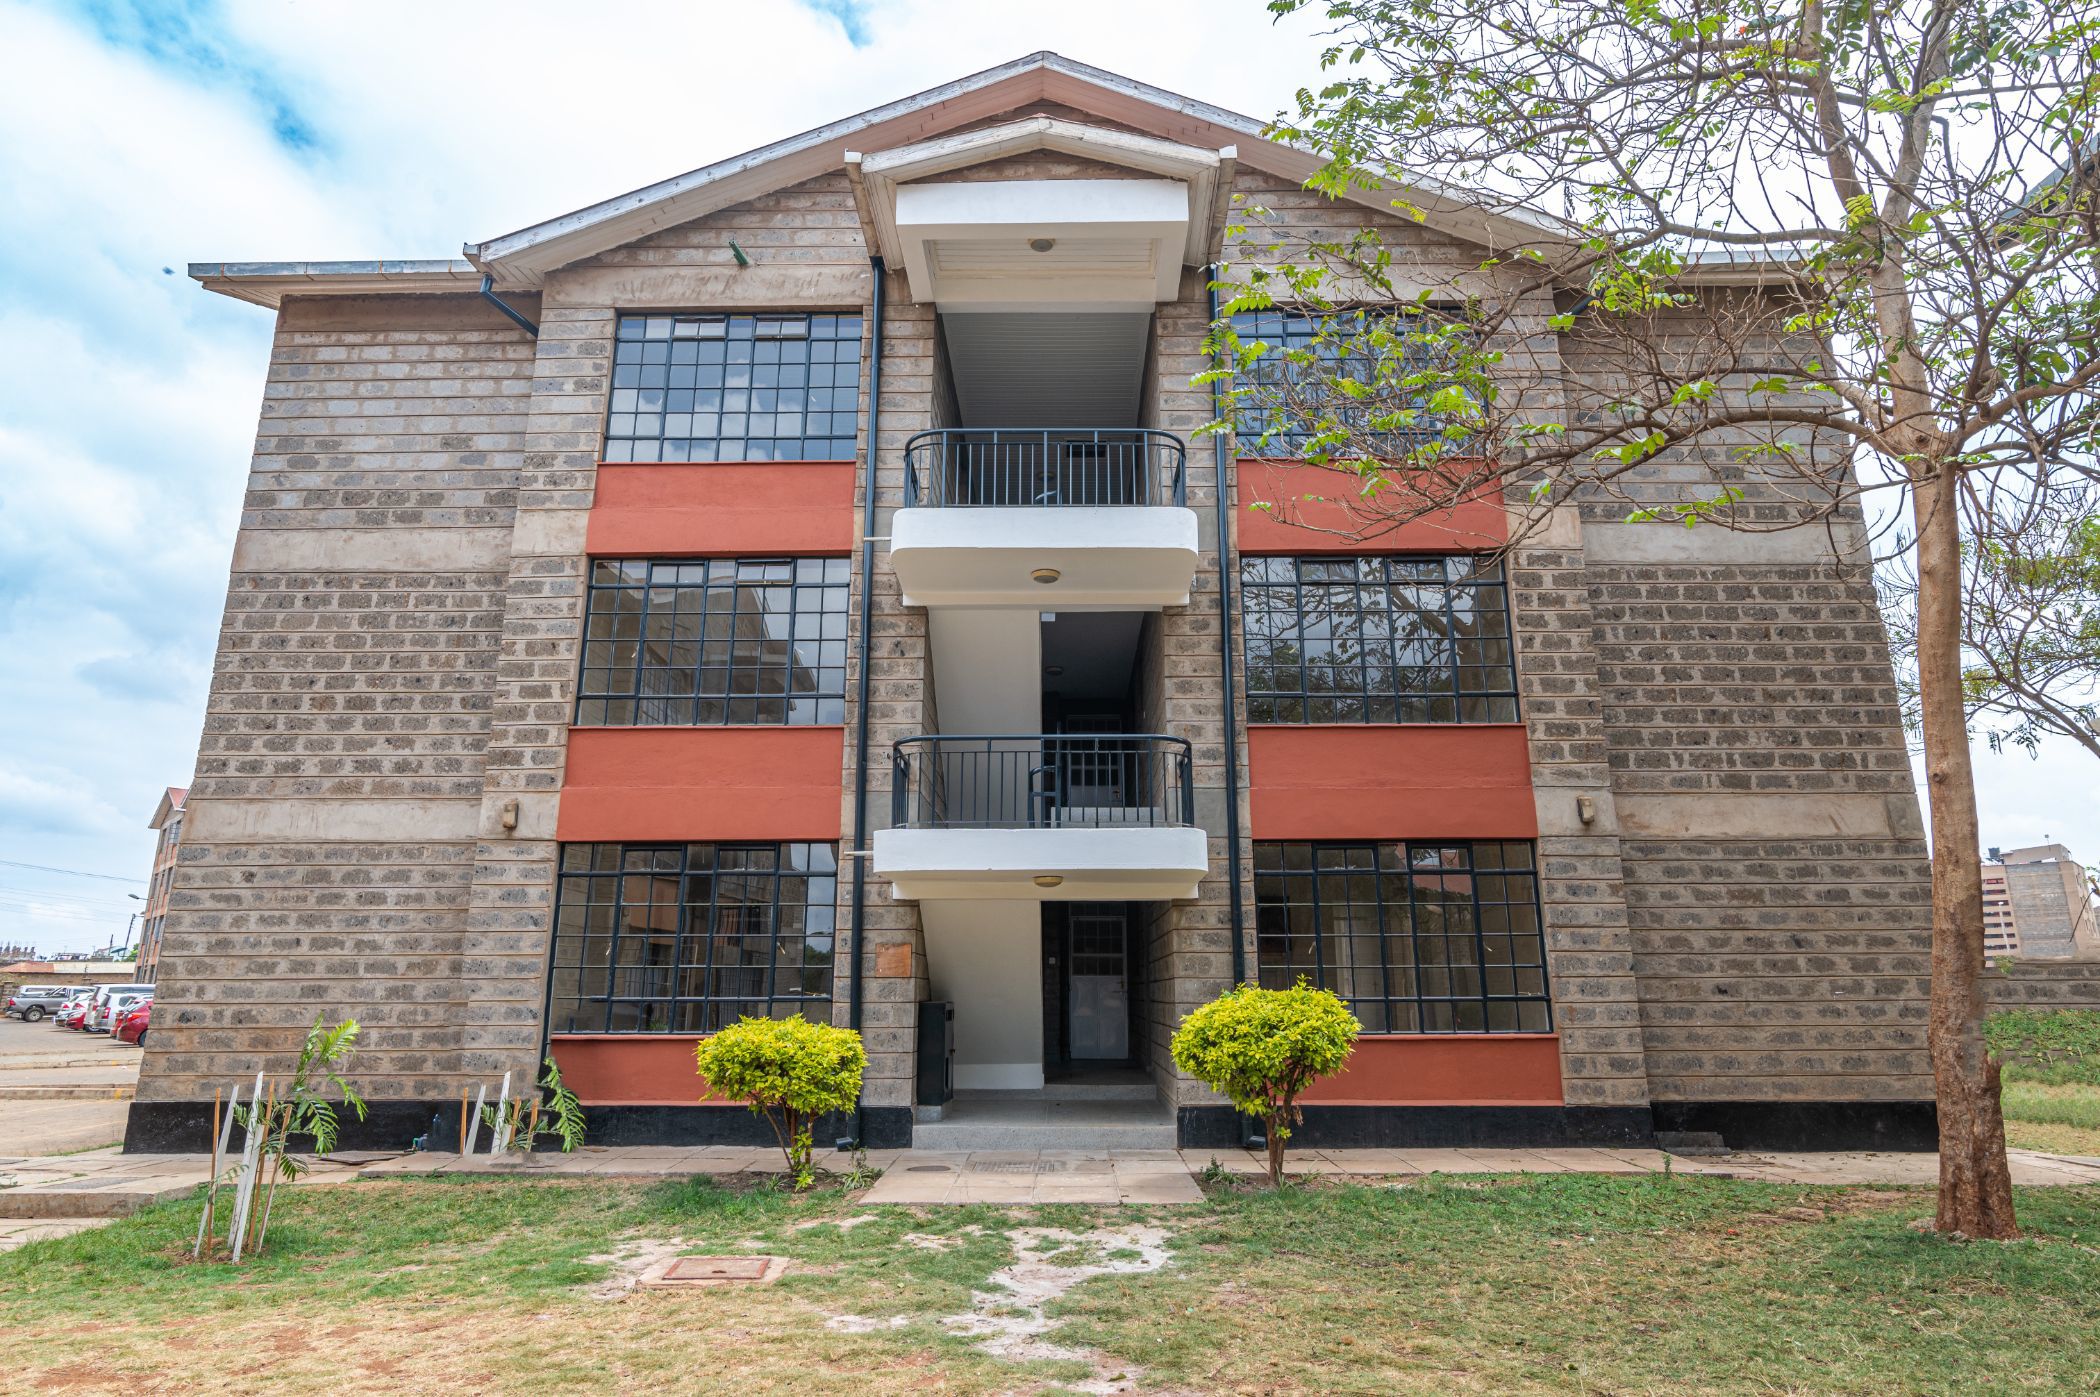 3 bedroom apartment for sale in Thika (Kenya)